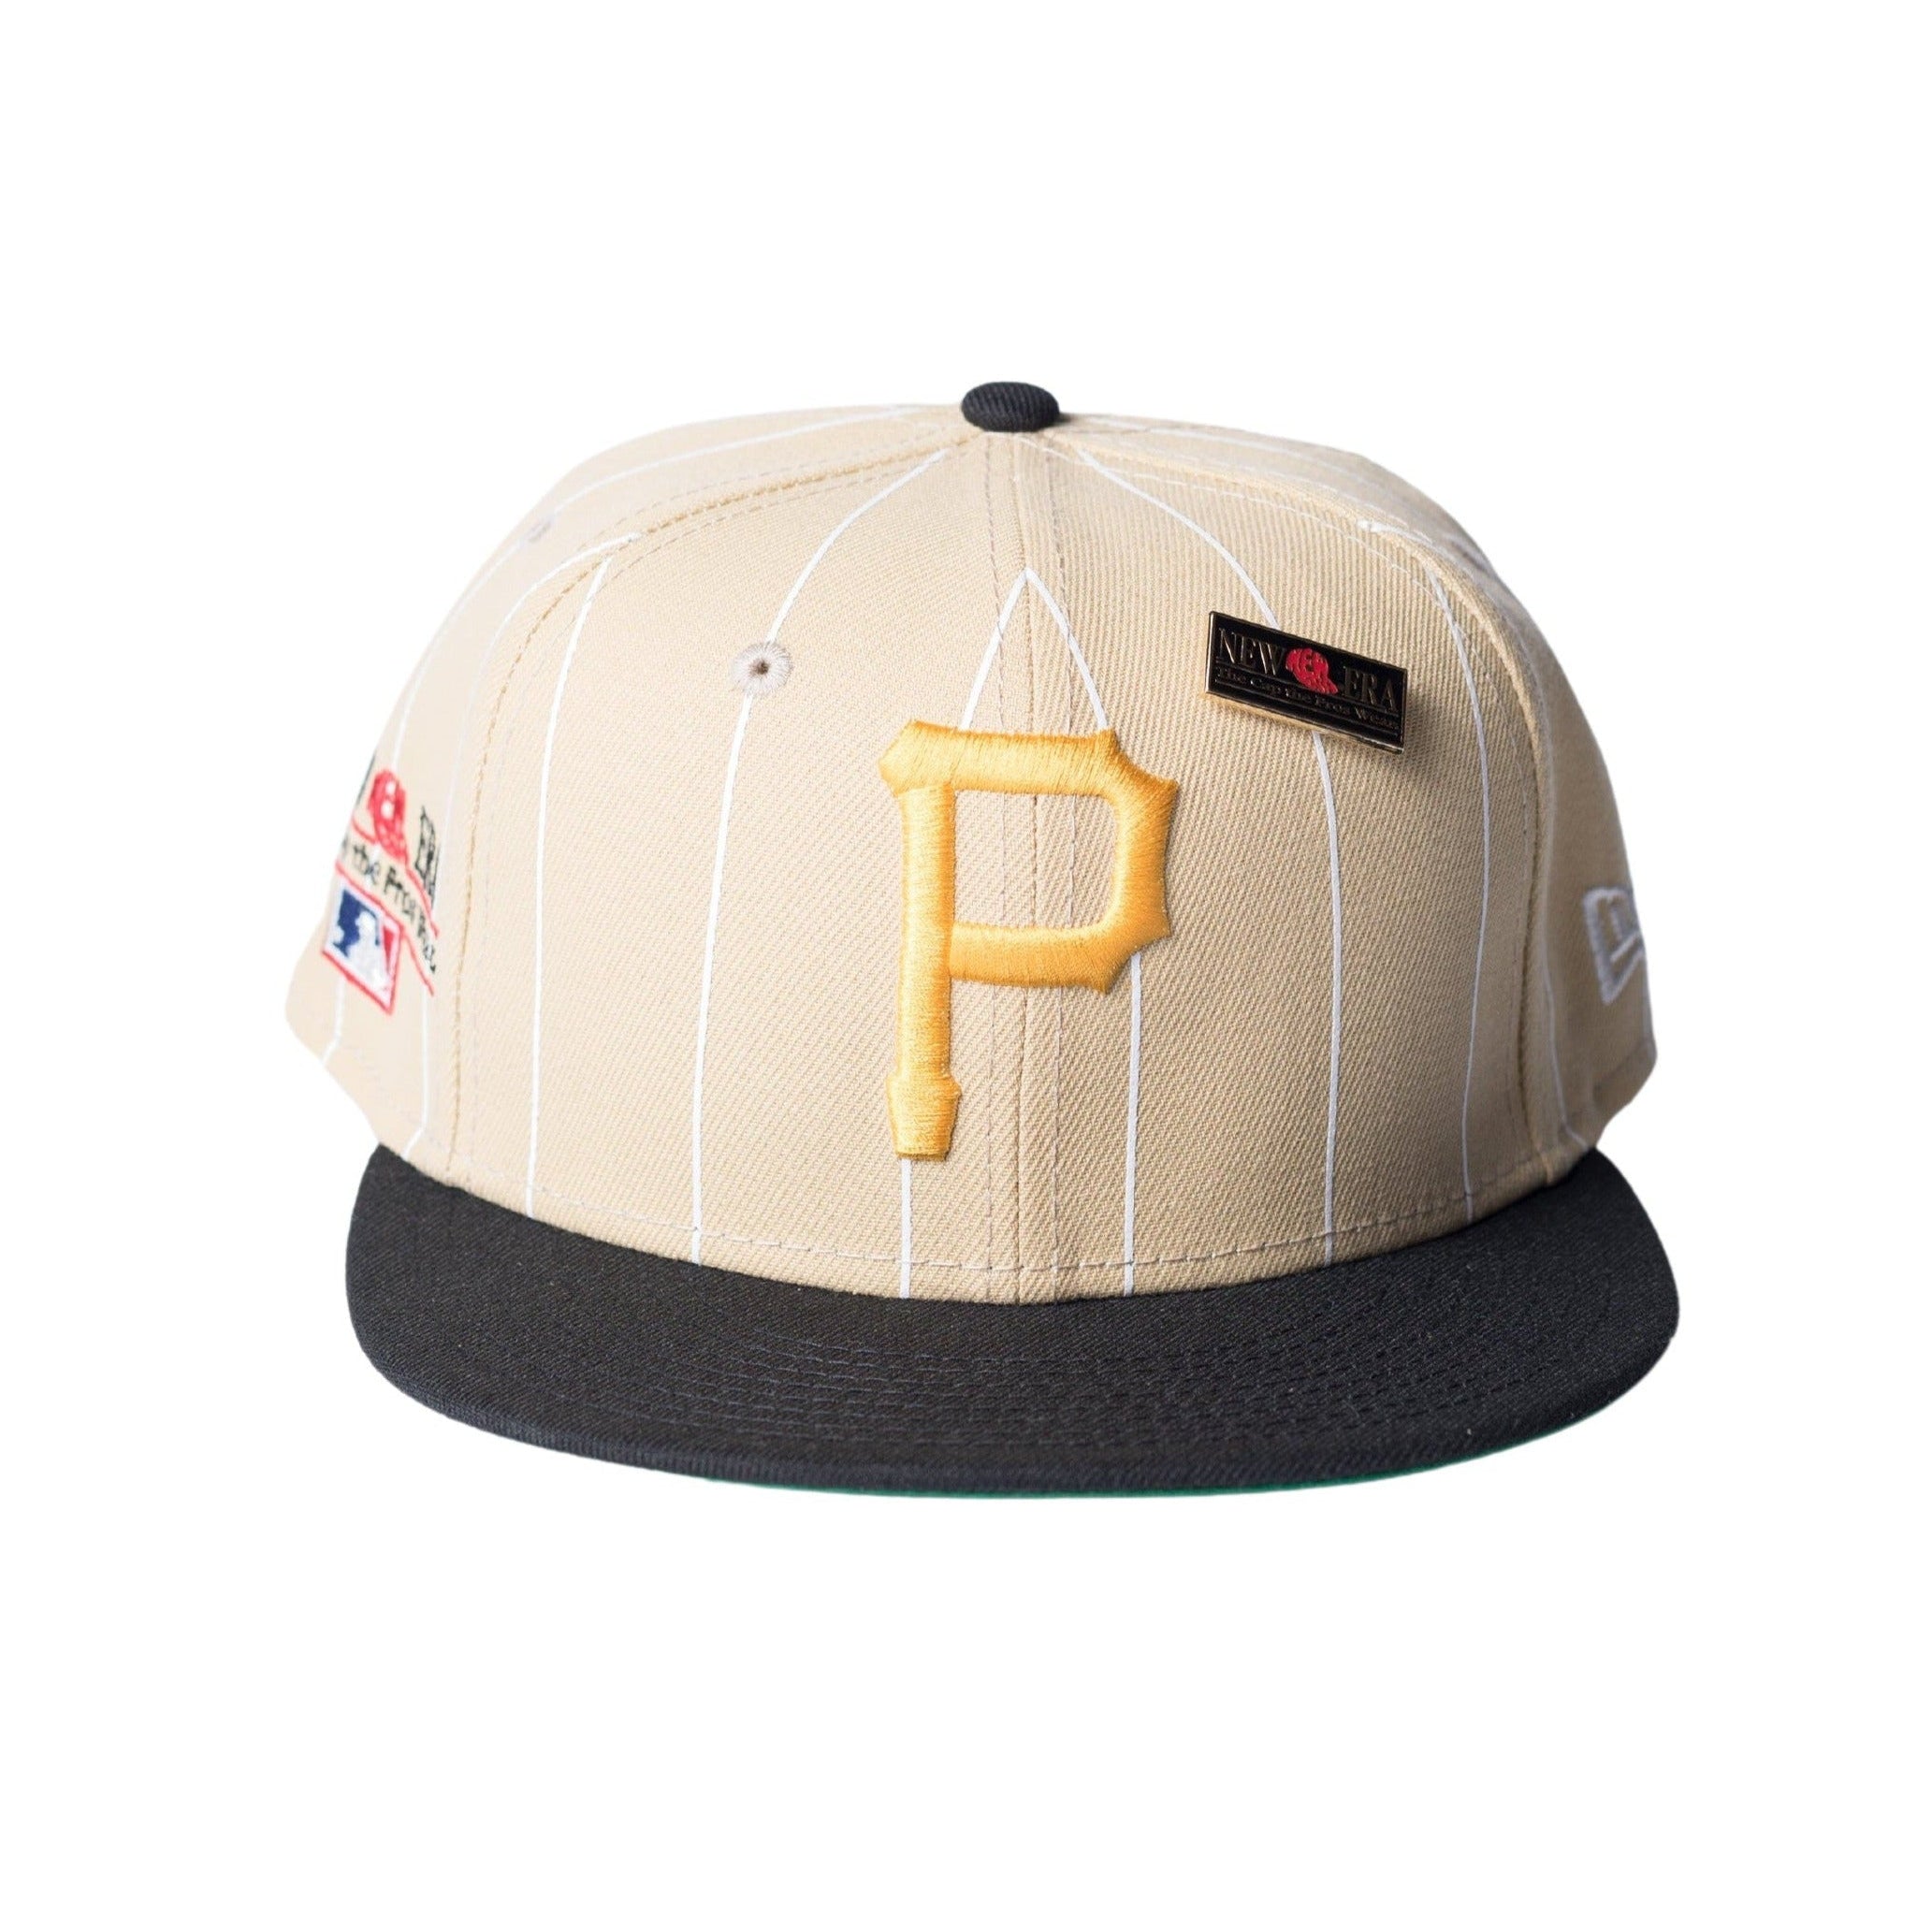 Pittsburgh Pirates Pro Fitted Cap